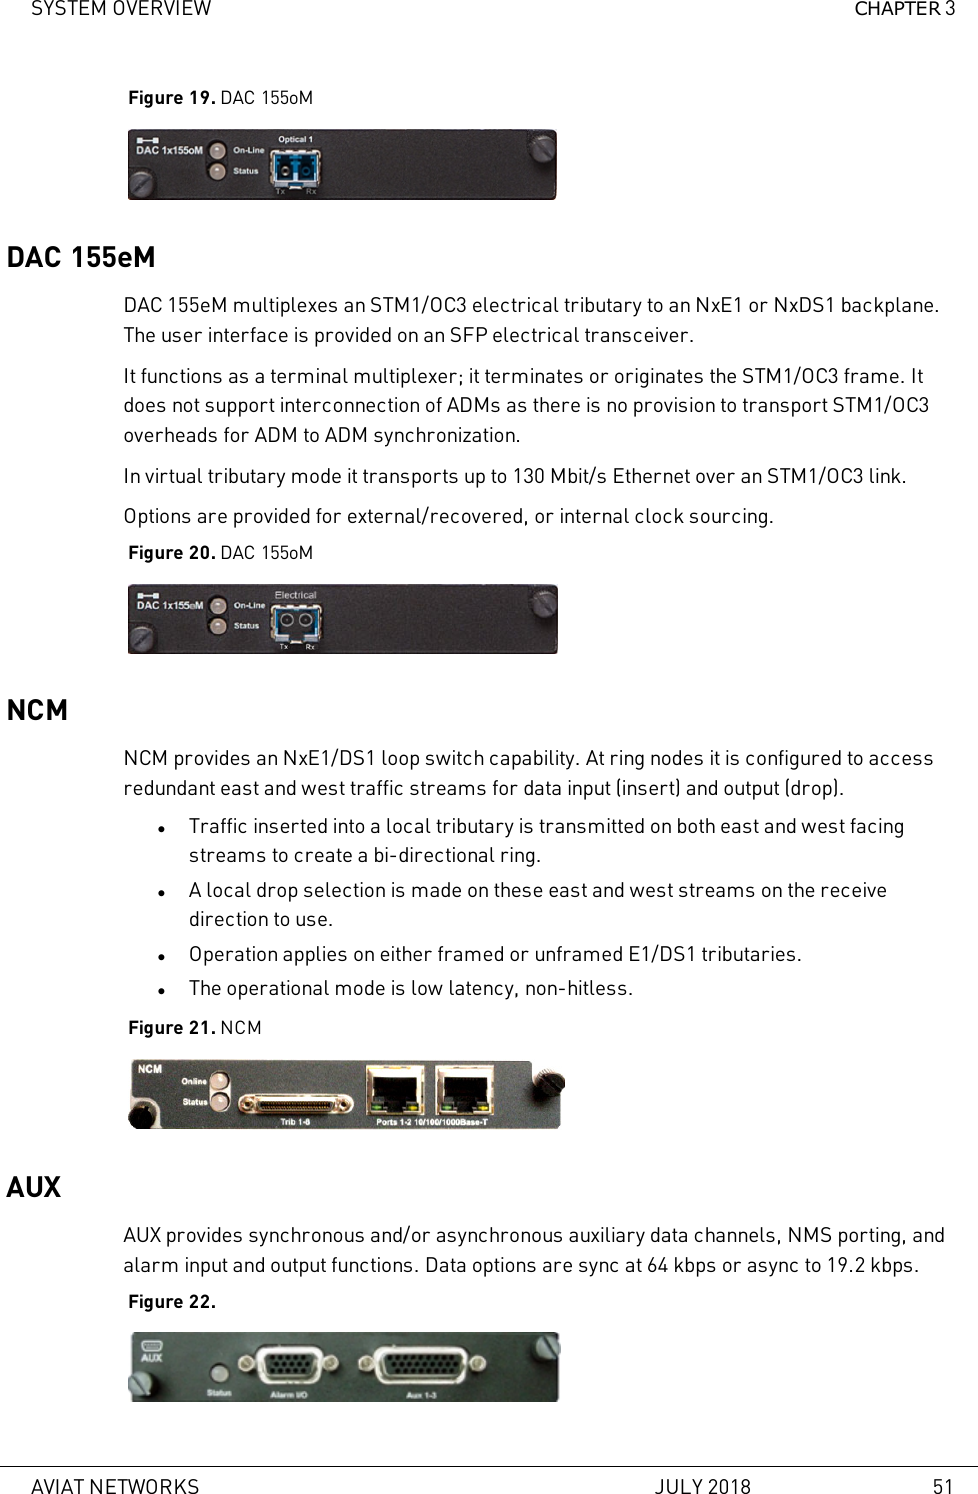 SYSTEM OVERVIEW CHAPTER 3Figure 19. DAC 155oMDAC 155eMDAC 155eM multiplexes an STM1/OC3 electrical tributary to an NxE1 or NxDS1 backplane.The user interface is provided on an SFP electrical transceiver.It functions as a terminal multiplexer; it terminates or originates the STM1/OC3 frame. Itdoes not support interconnection of ADMs as there is no provision to transport STM1/OC3overheads for ADM to ADM synchronization.In virtual tributary mode it transports up to 130 Mbit/s Ethernet over an STM1/OC3 link.Options are provided for external/recovered, or internal clock sourcing.Figure 20. DAC 155oMNCMNCM provides an NxE1/DS1 loop switch capability. At ring nodes it is configured to accessredundant east and west traffic streams for data input (insert) and output (drop).lTraffic inserted into a local tributary is transmitted on both east and west facingstreams to create a bi-directional ring.lA local drop selection is made on these east and west streams on the receivedirection to use.lOperation applies on either framed or unframed E1/DS1 tributaries.lThe operational mode is low latency, non-hitless.Figure 21. NCMAUXAUX provides synchronous and/or asynchronous auxiliary data channels, NMS porting, andalarm input and output functions. Data options are sync at 64 kbps or async to 19.2 kbps.Figure 22.AVIAT NETWORKS JULY 2018 51